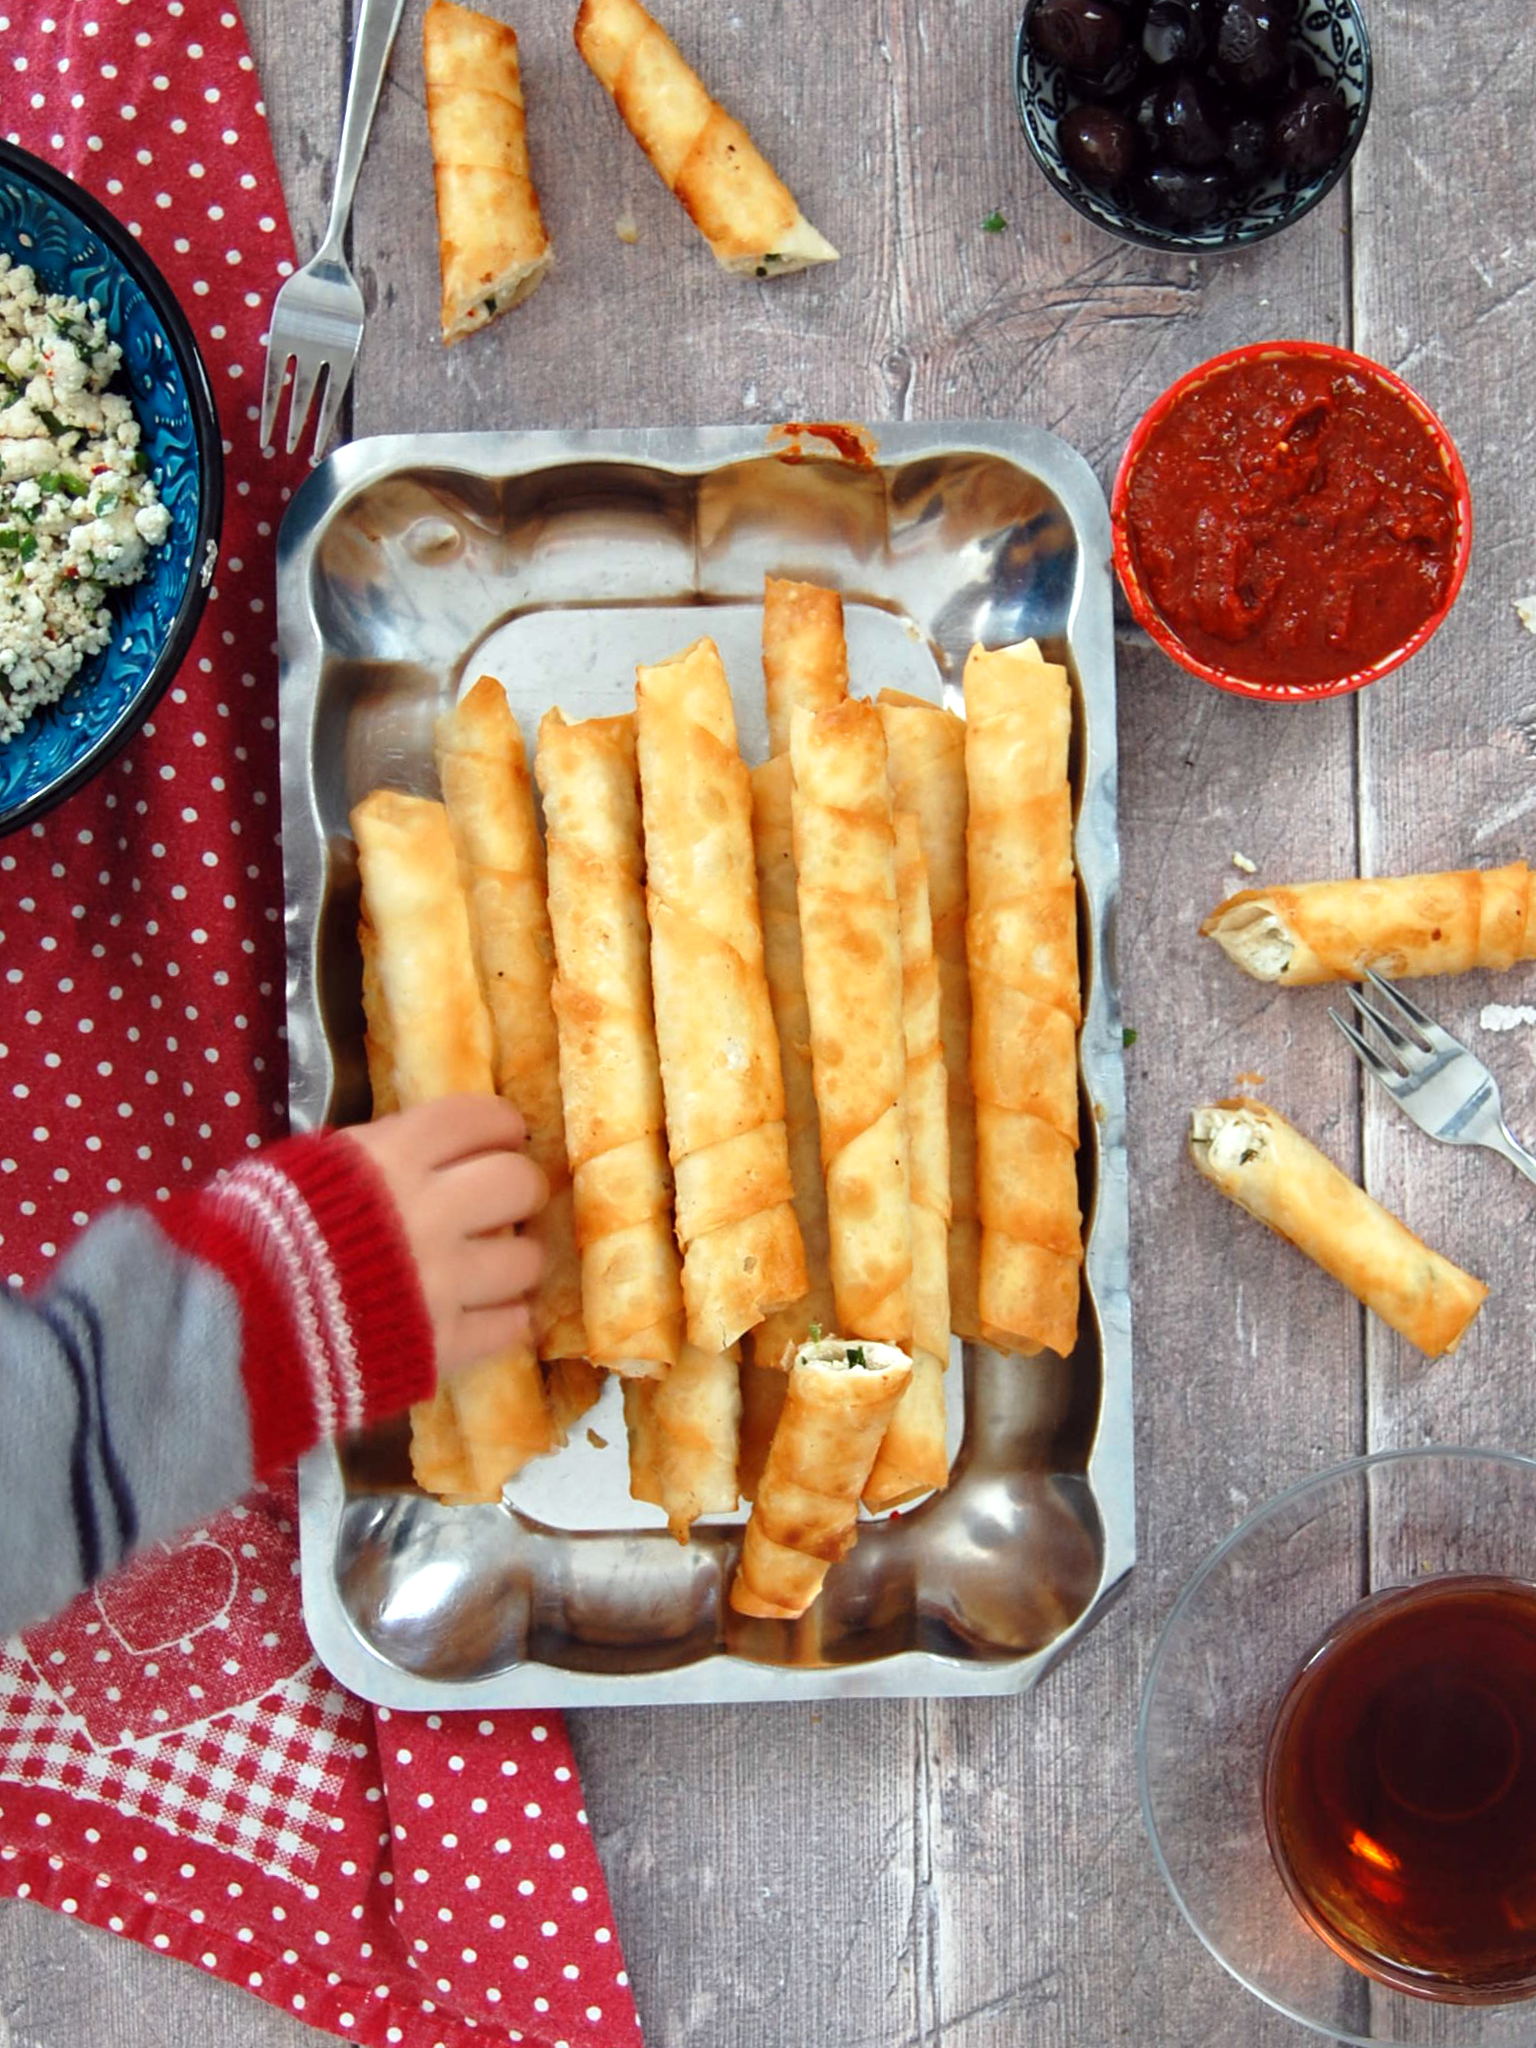 Childs hand grabbing Turkish cigar shapped fried pastries. Filled with cheese. Sigara borek